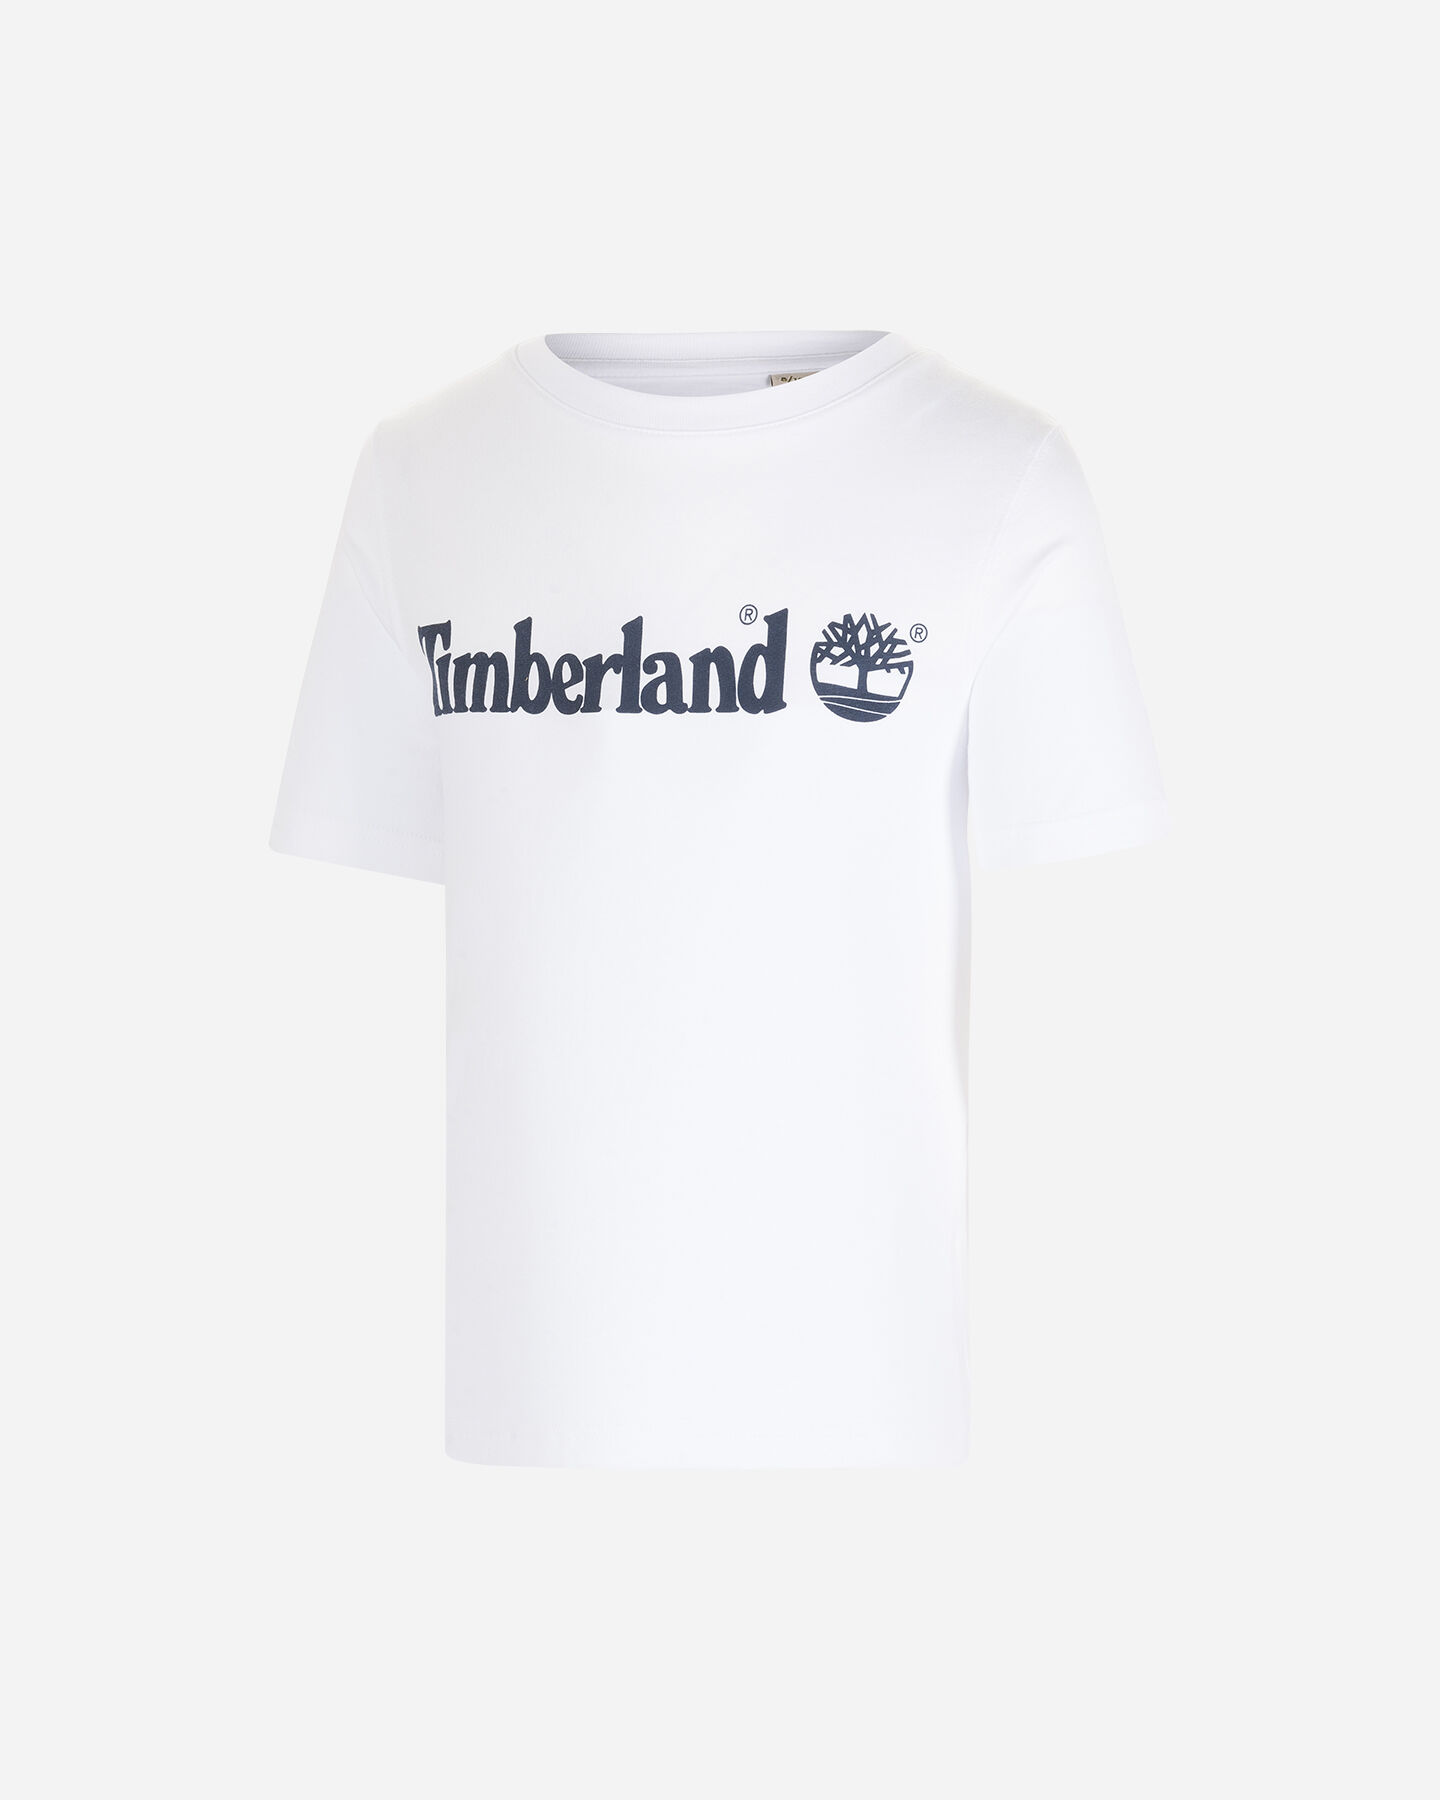  T-Shirt TIMBERLAND PLOGO EXTENDED JR S4088880|10B|6A scatto 0